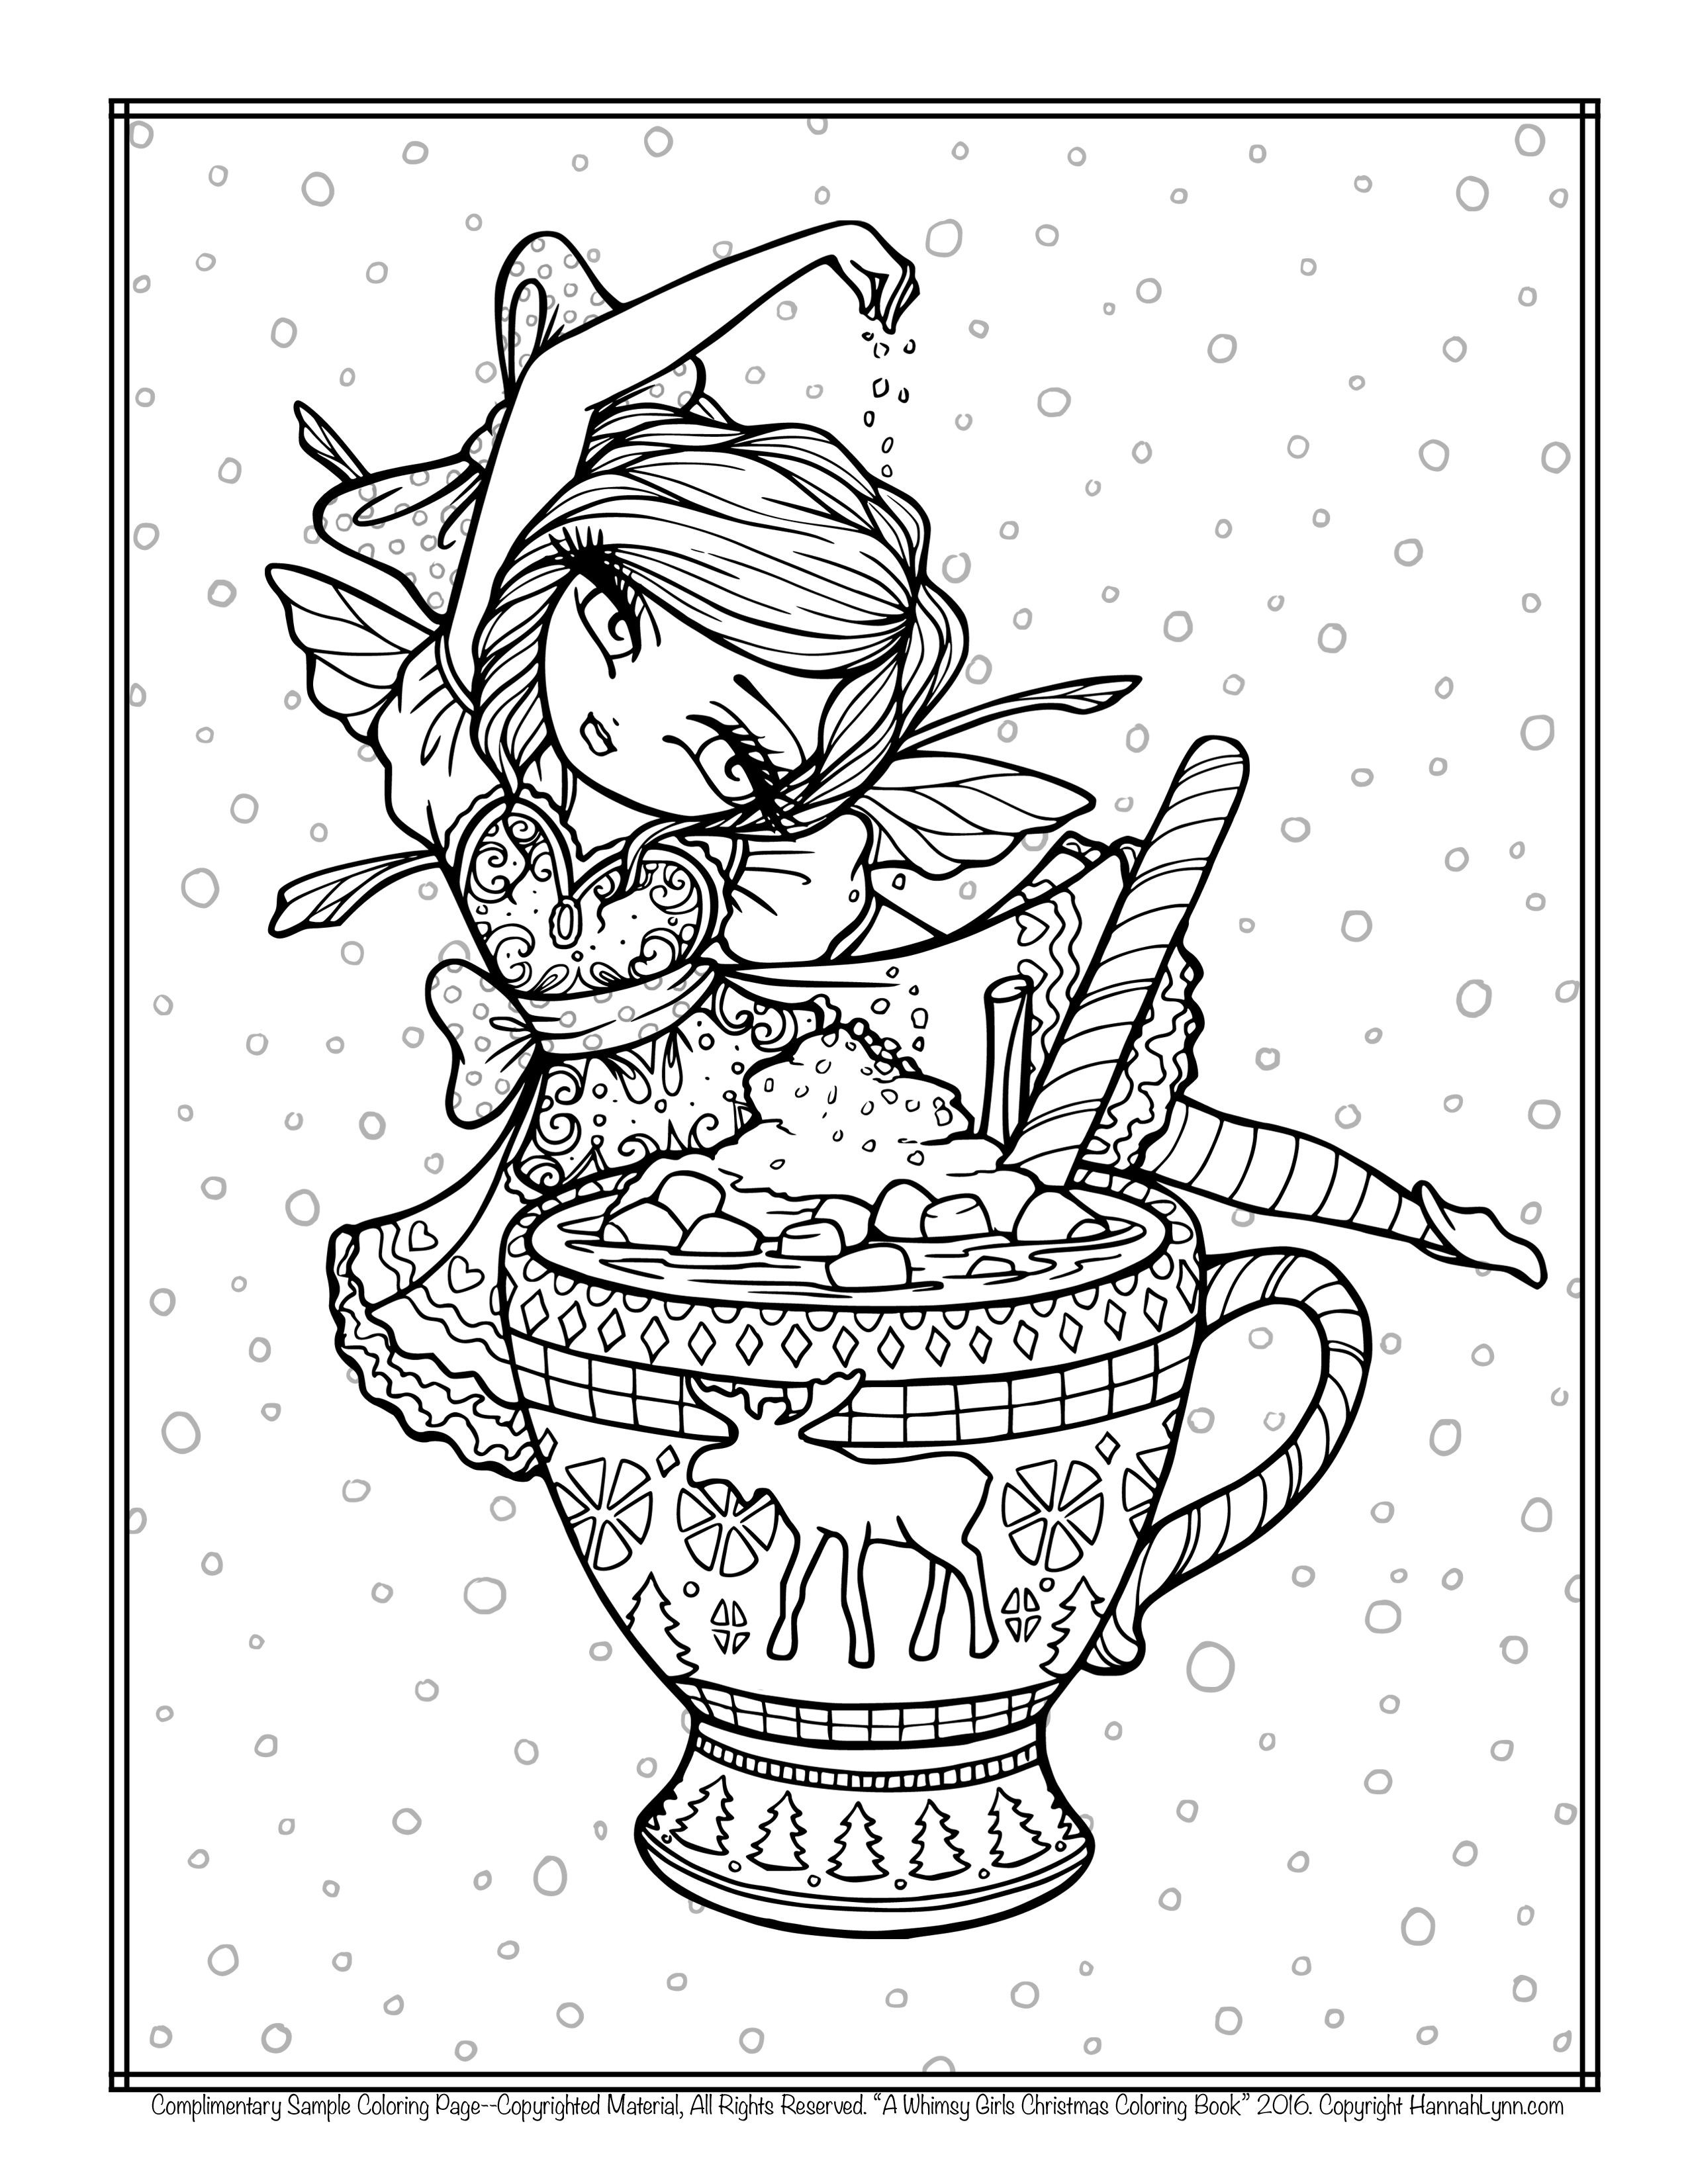 Christmas Girl Coloring Pages For Adults
 FREE Hannah Lynn Coloring Page HannahLynn Hot Cocoa